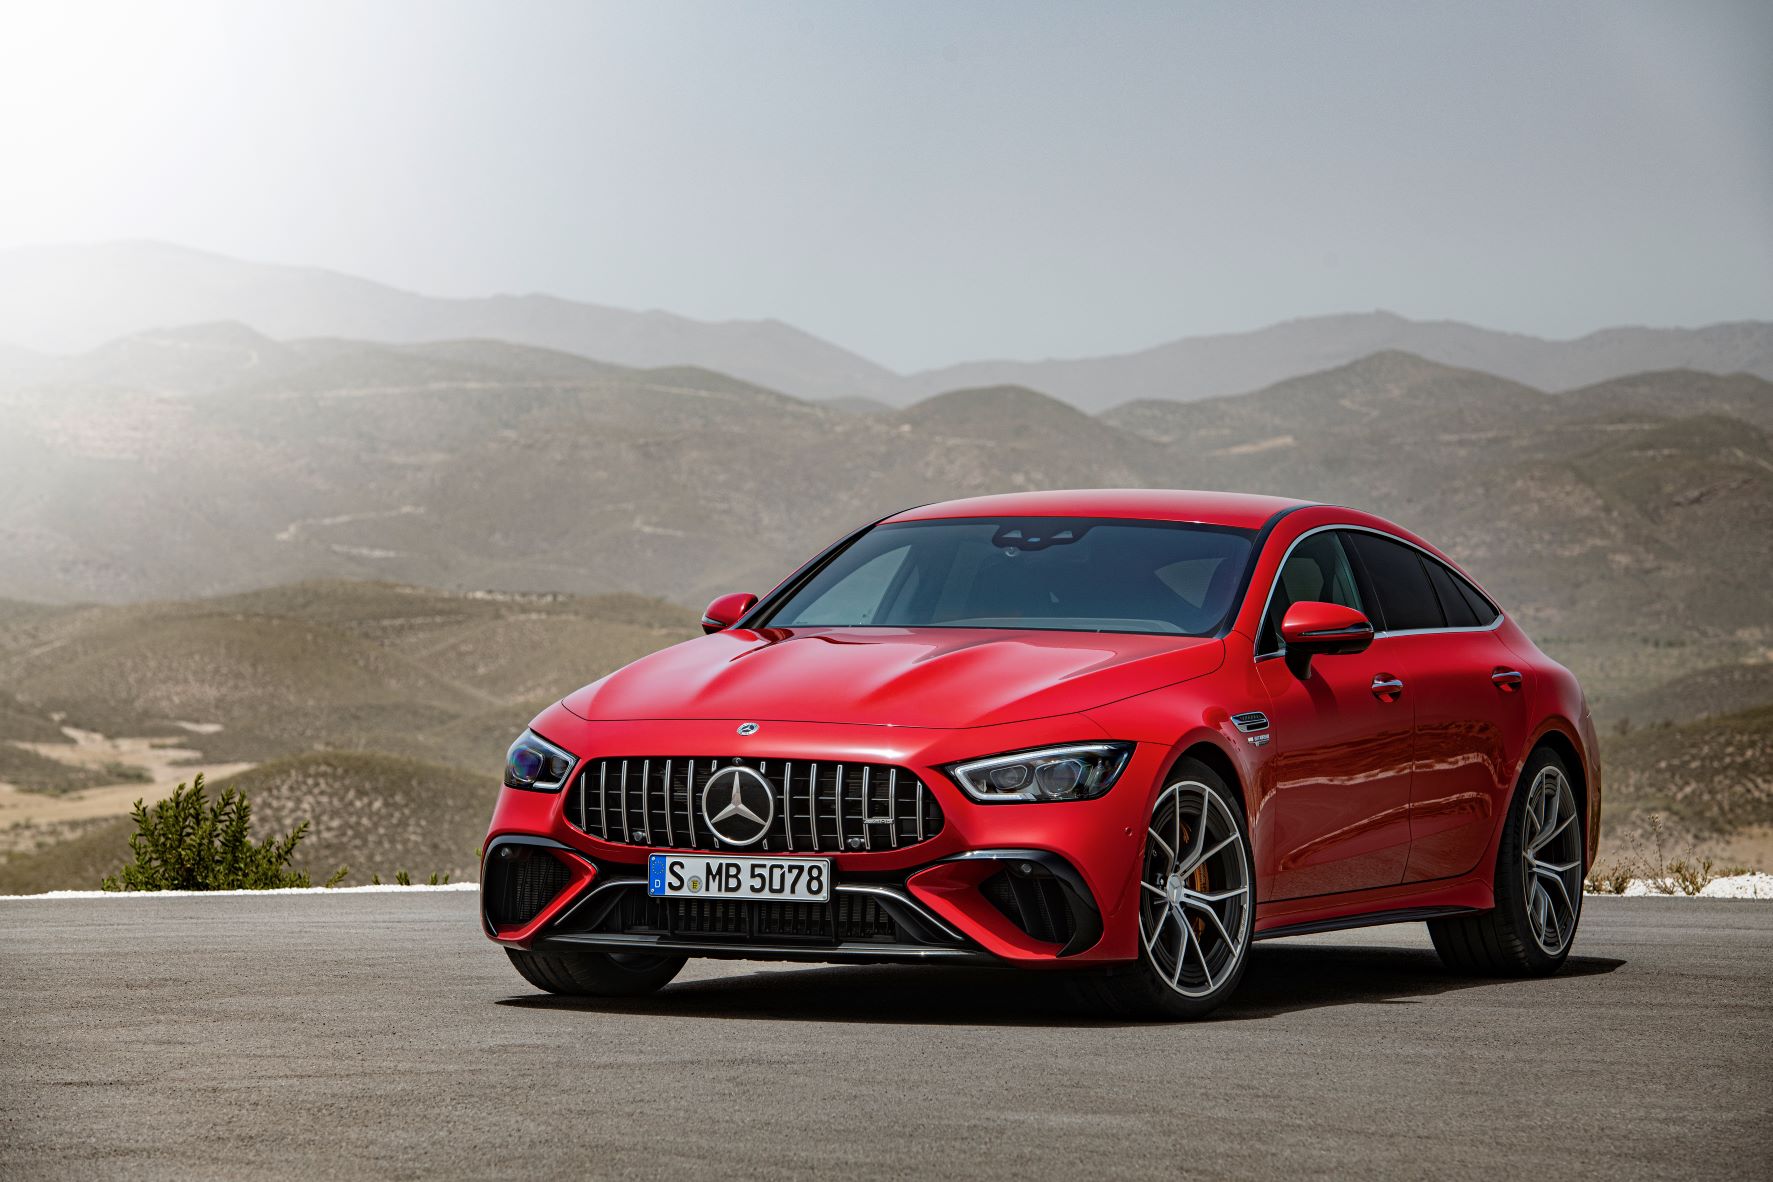 The Mercedes-AMG GT63 S E Performance